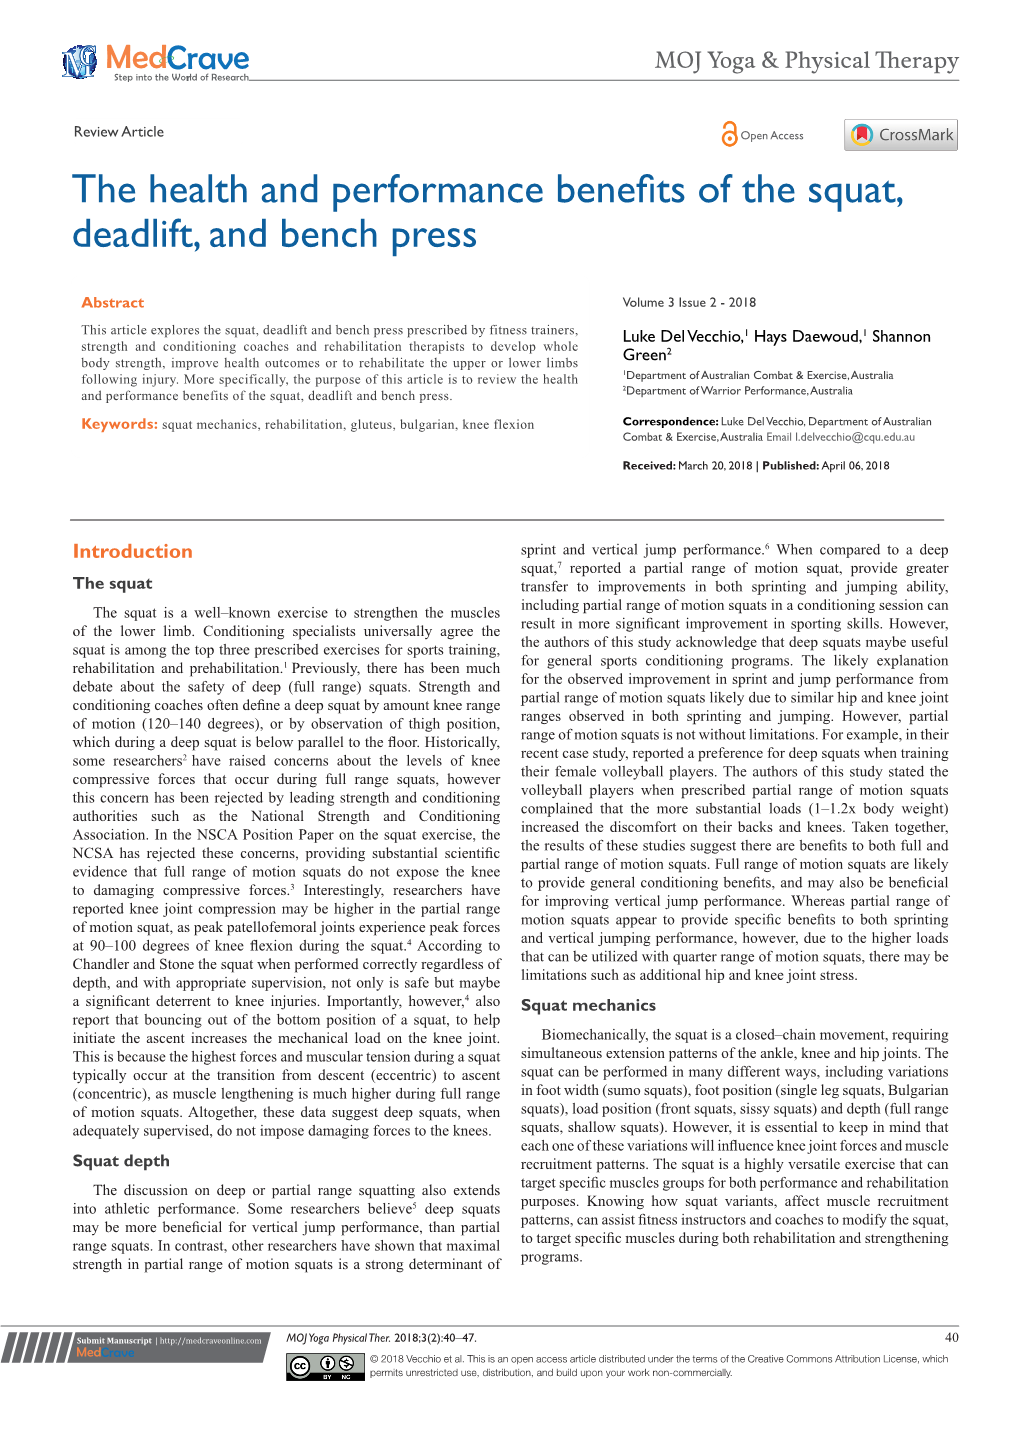 The Health and Performance Benefits of the Squat, Deadlift and Bench Press